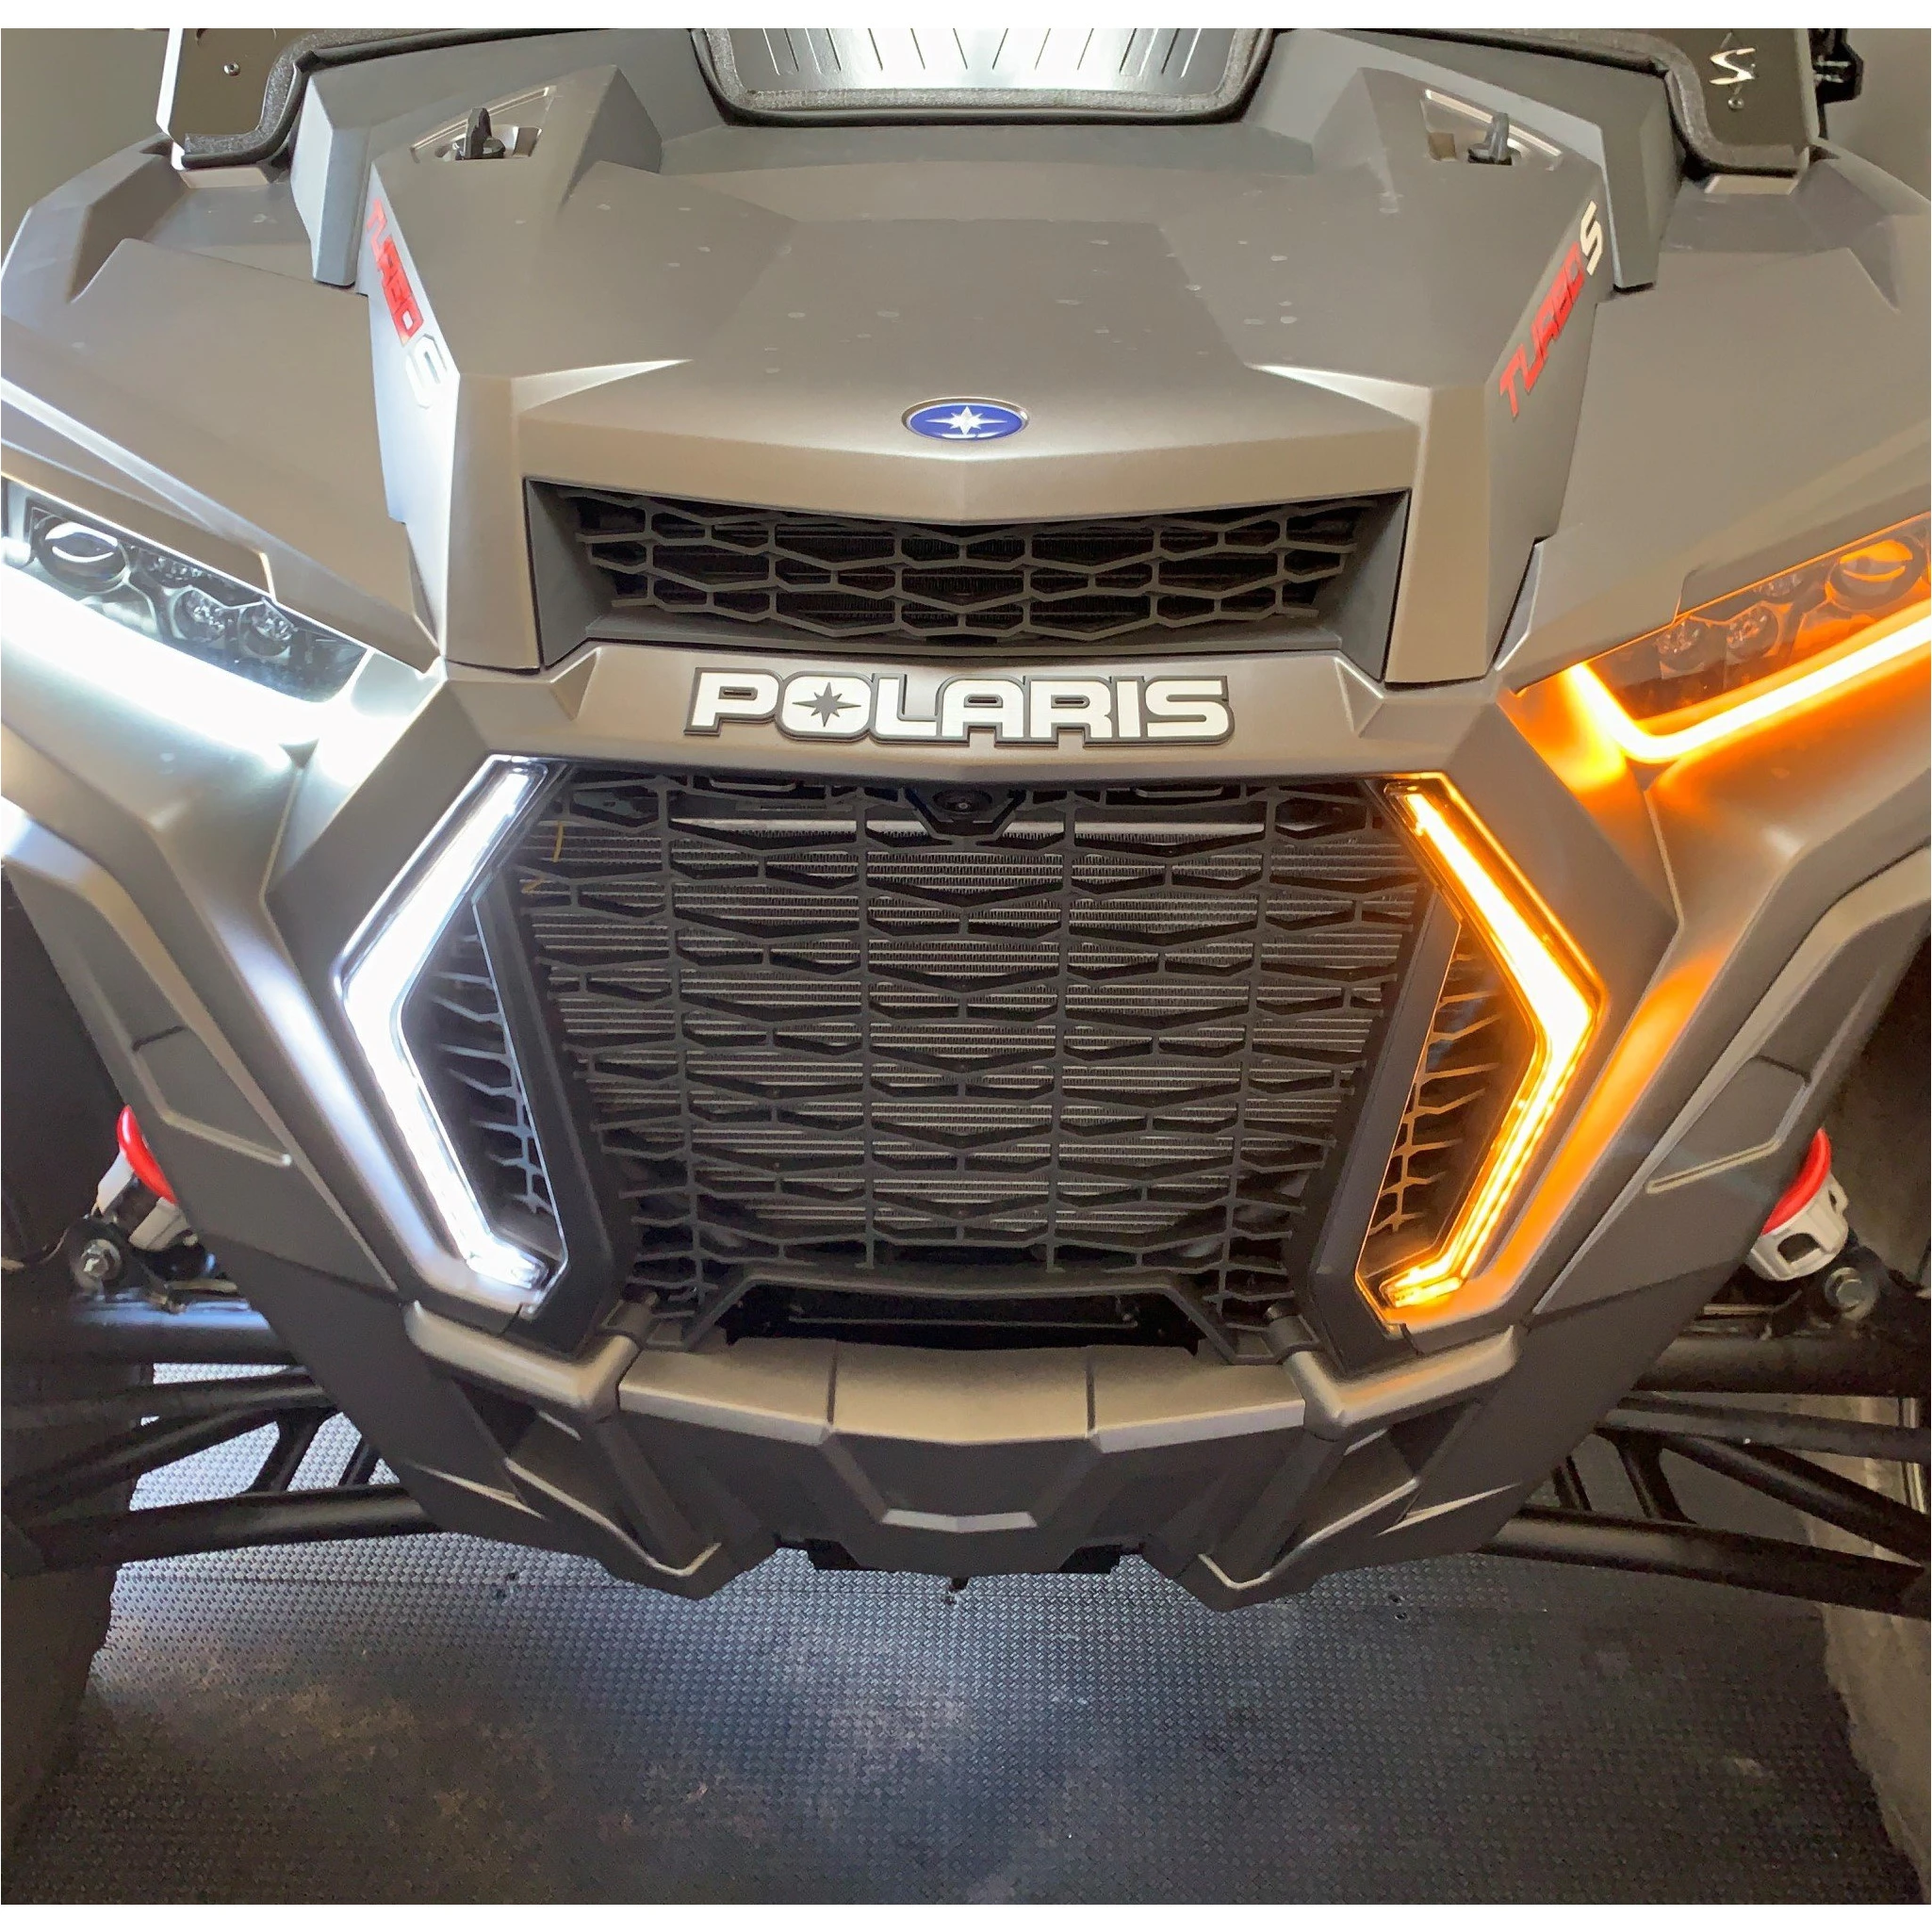 Turbo S MCSADVENTURES Plug and Play Street Legal Turn Signal Kit Horn And Hazard with LED Fang Lights for 19+ Polaris RZR Trail Turbo XP 1000 